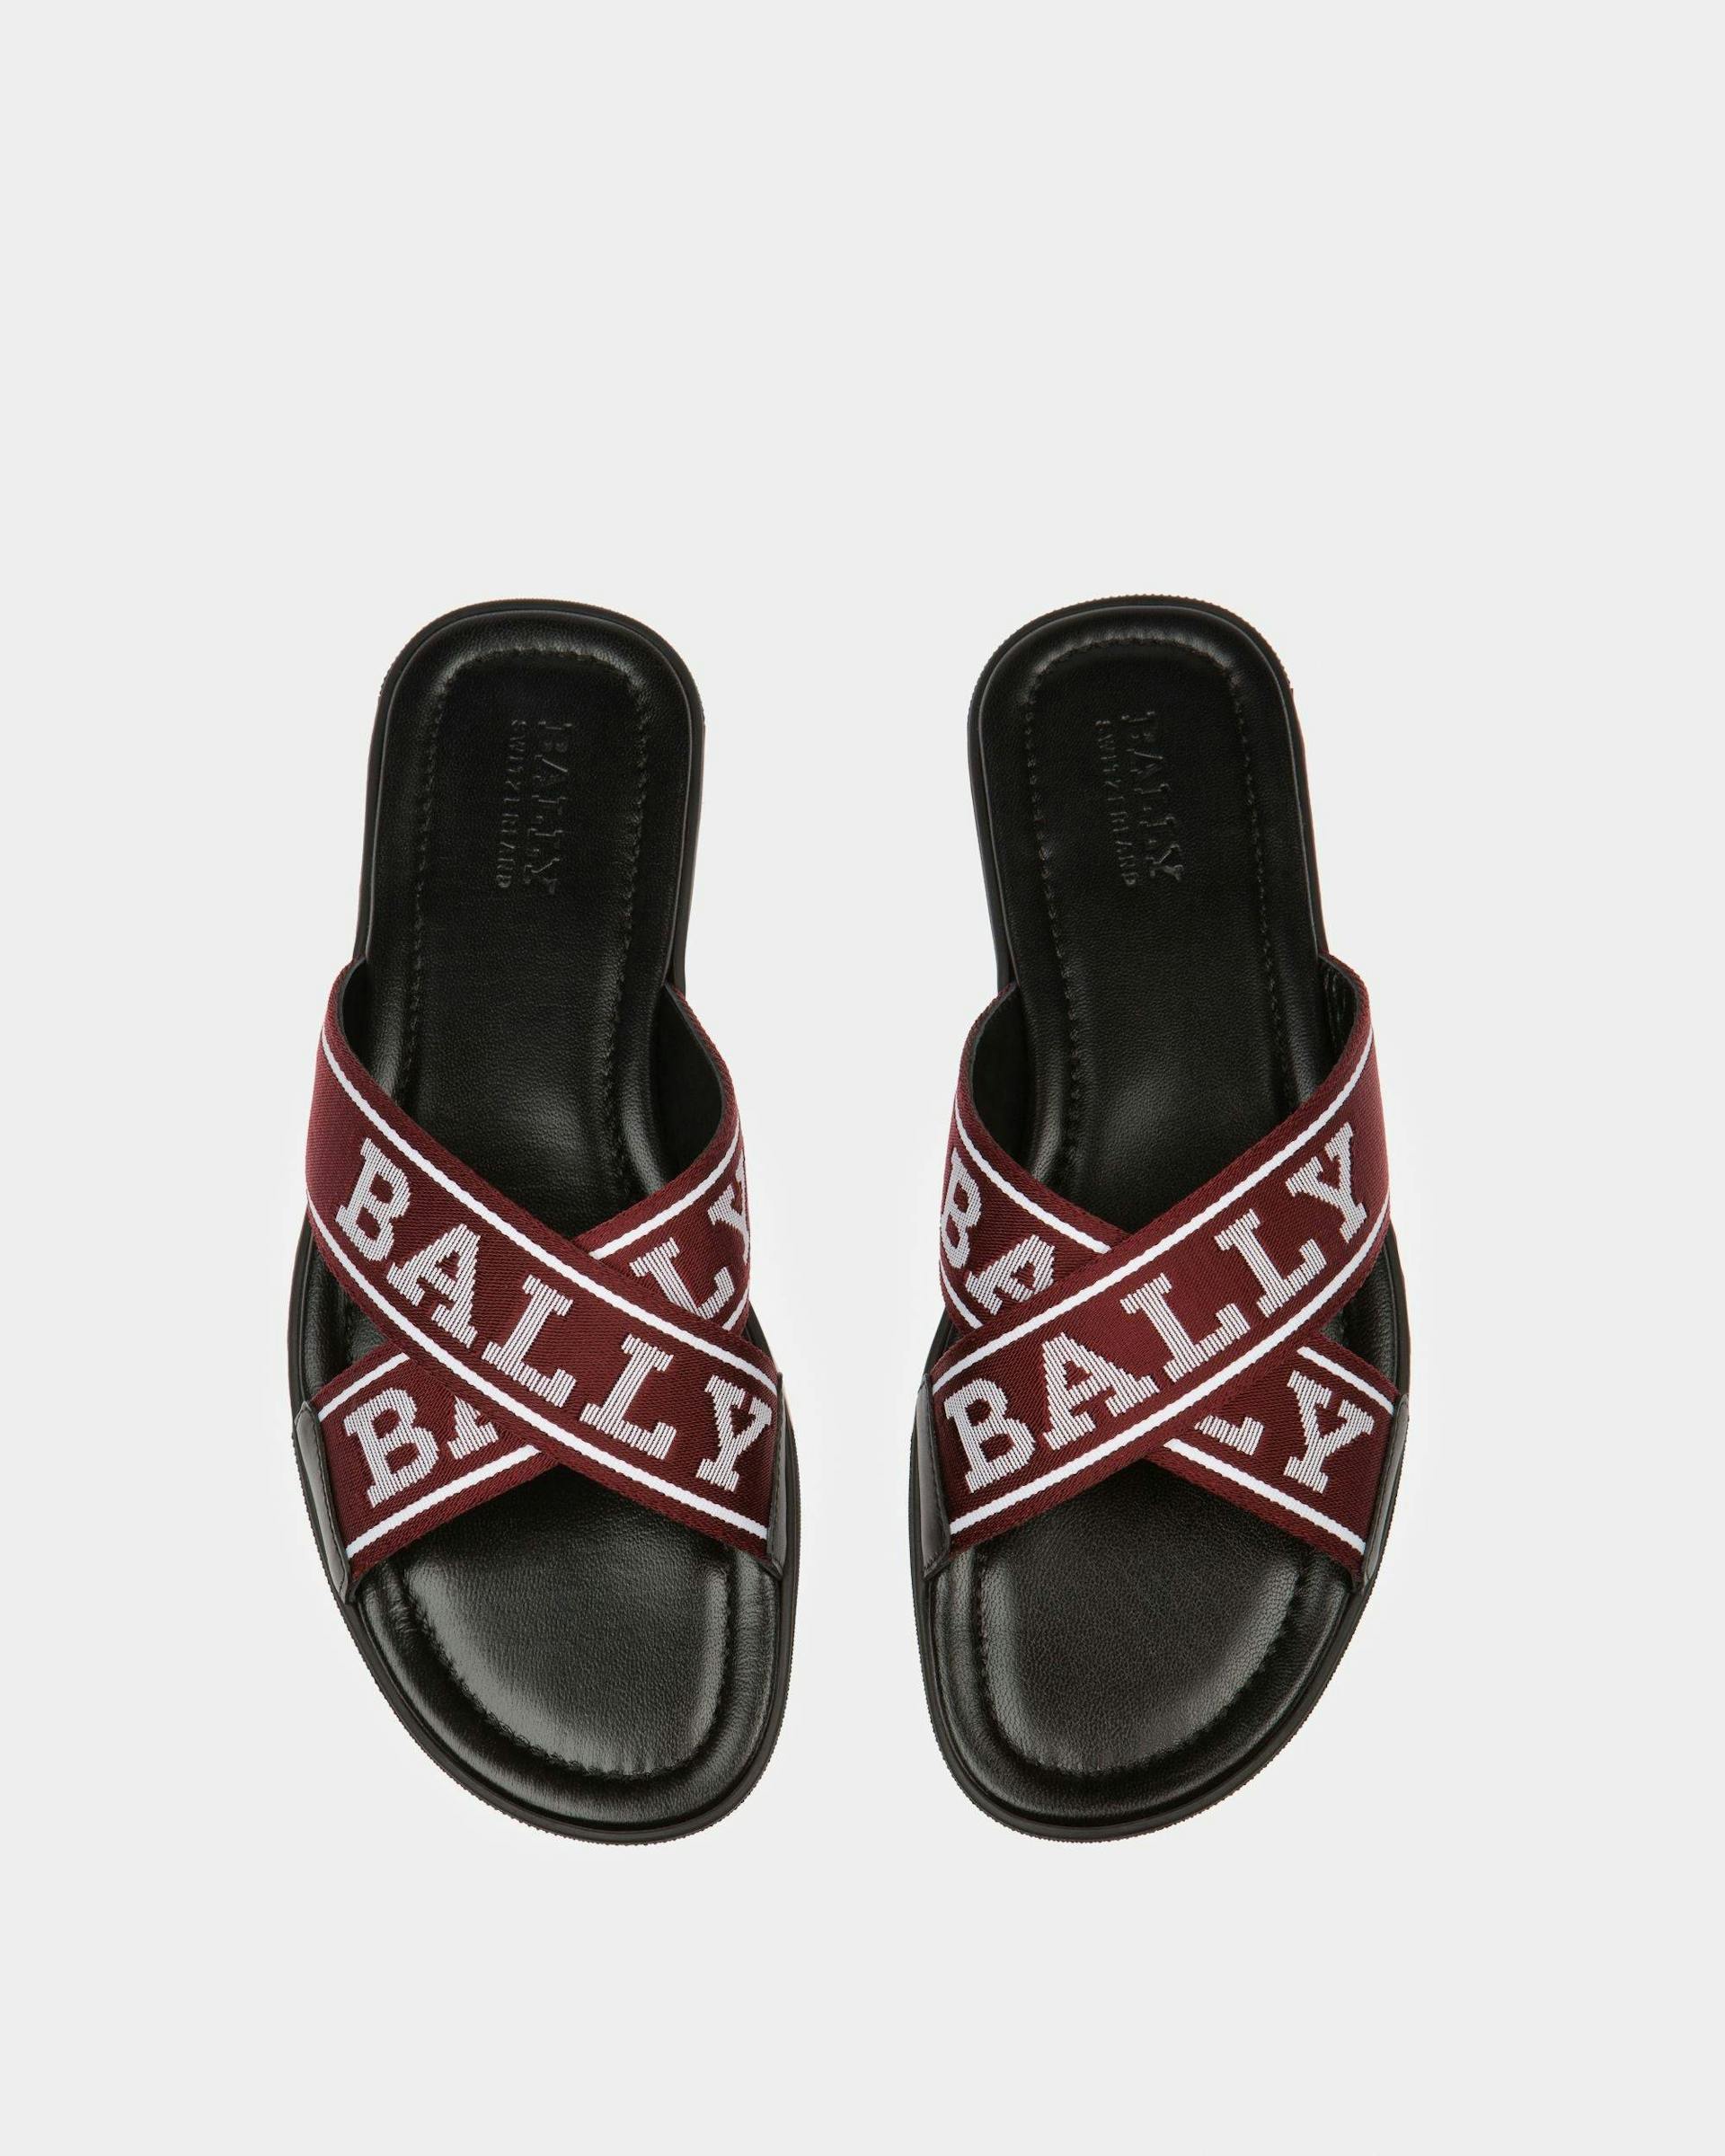 Bonks Fabric & Leather Sandals In Bally Red - Men's - Bally - 02